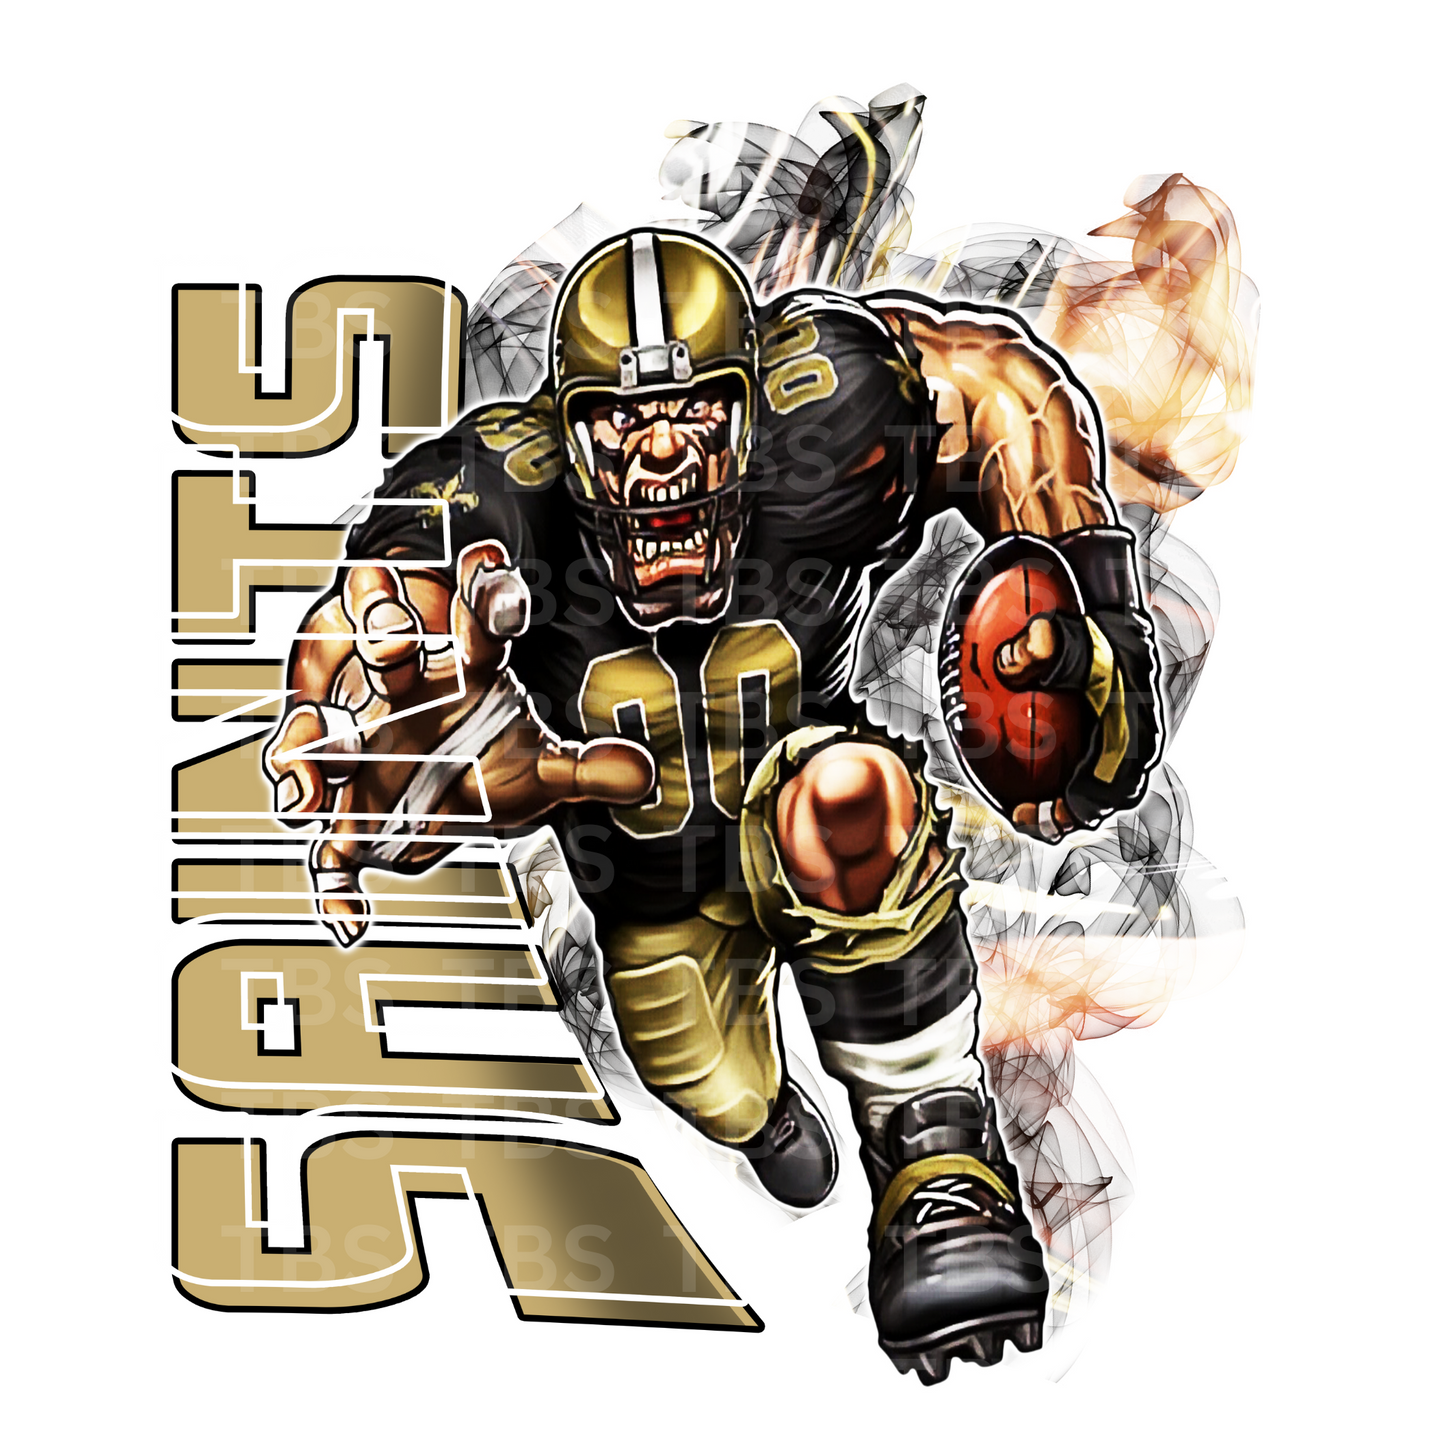 PRO FOOTBALL (Style 1) T-SHIRT TRANSFERS (DTF or SUBLIMATION)